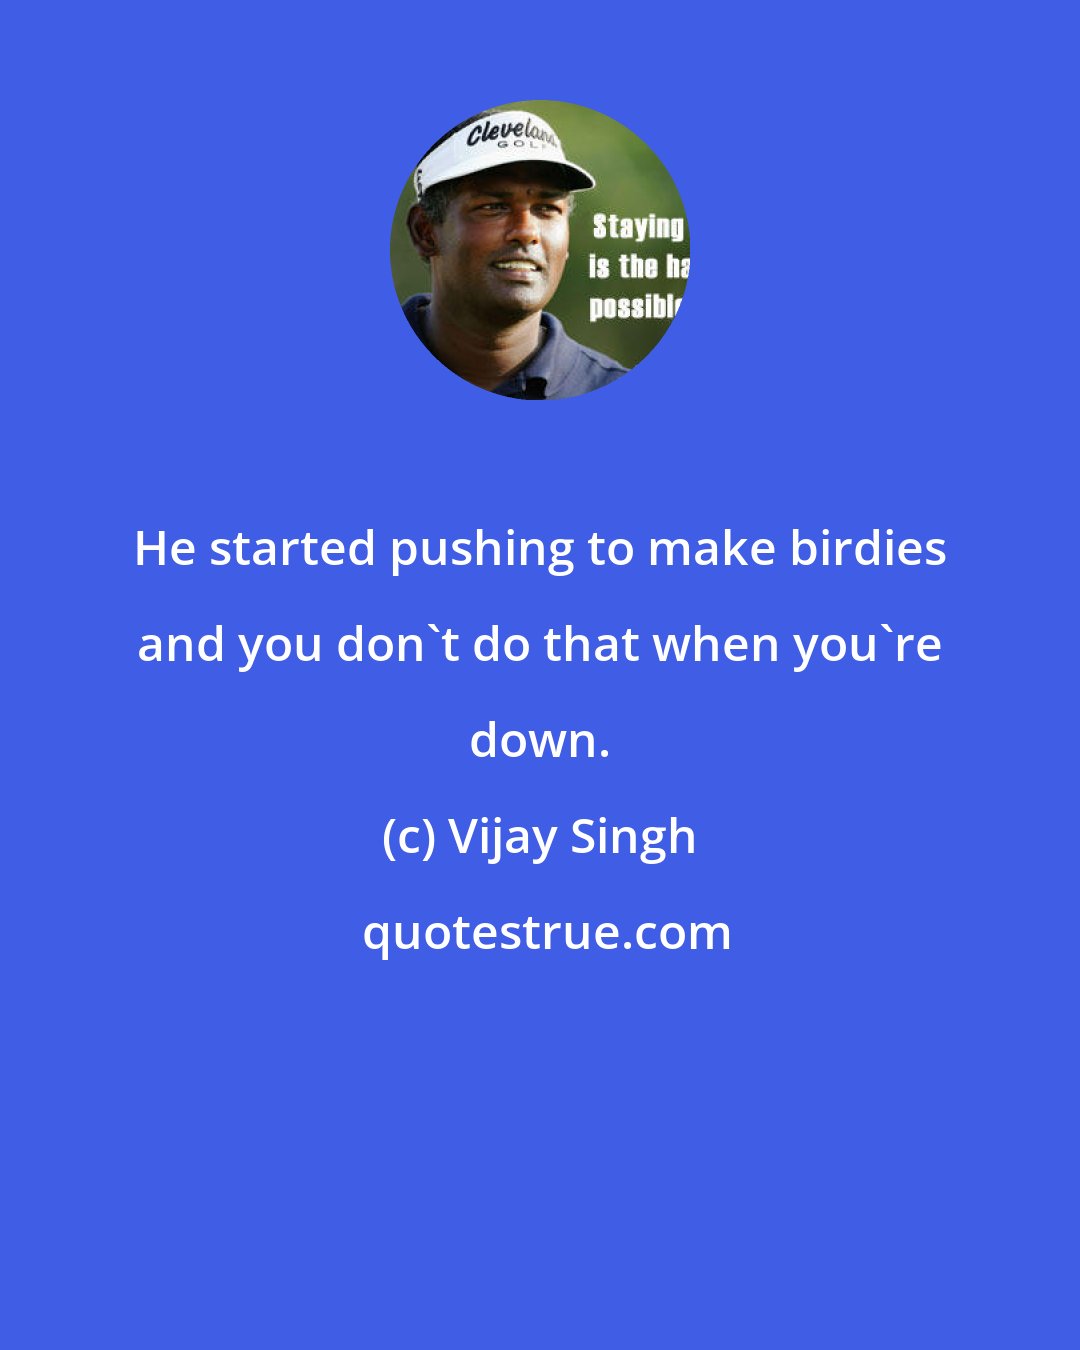 Vijay Singh: He started pushing to make birdies and you don't do that when you're down.